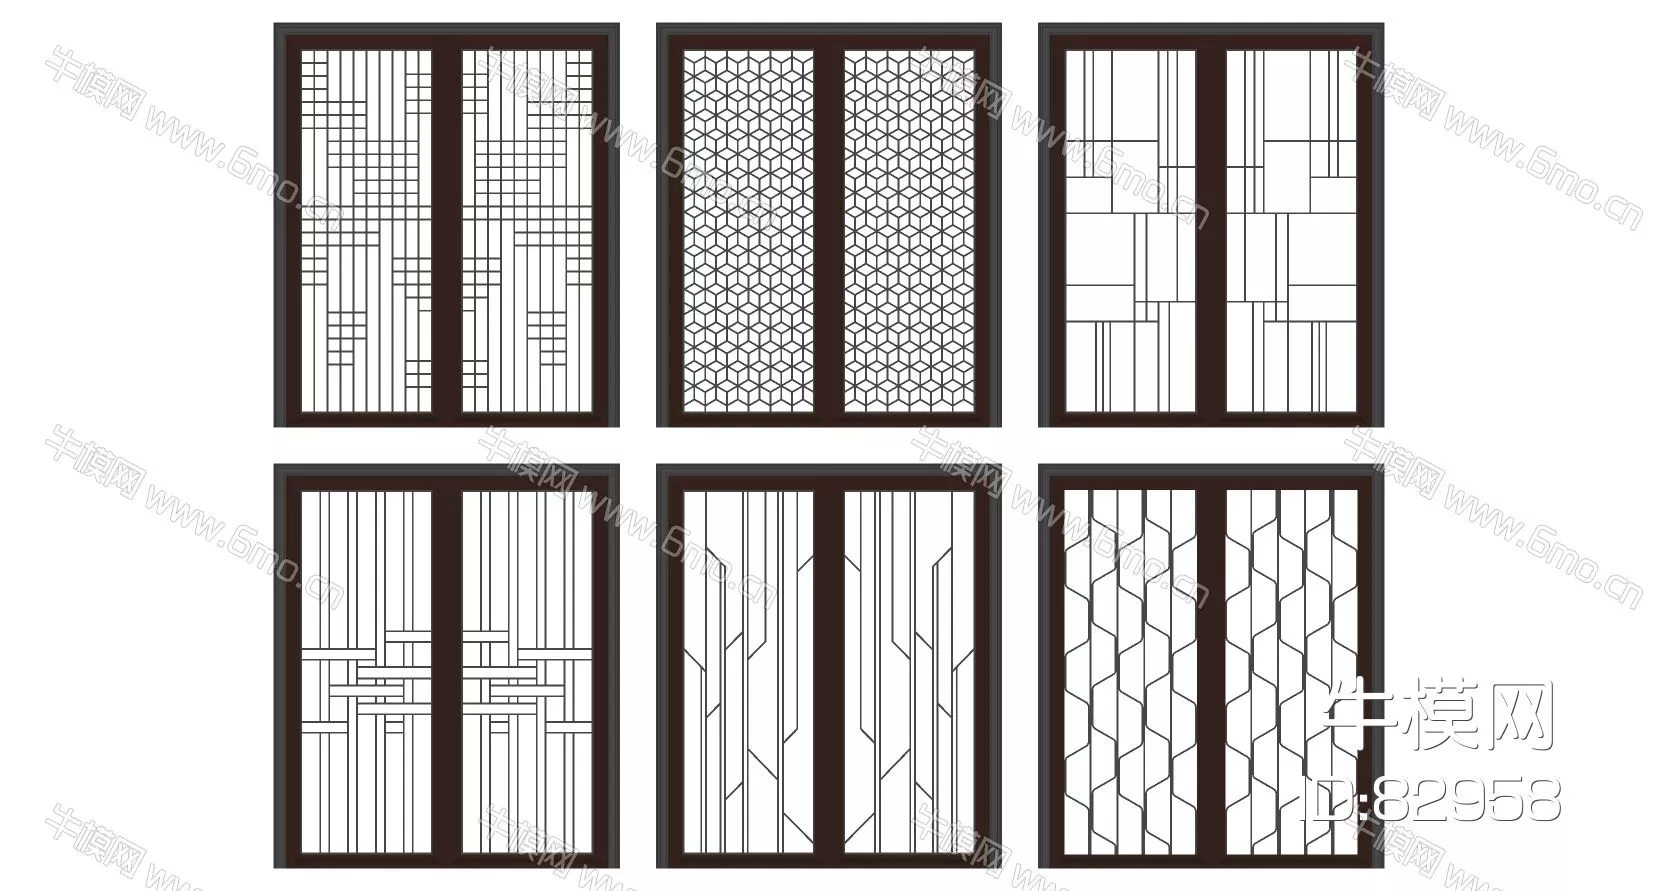 CHINESE DOOR AND WINDOWS - SKETCHUP 3D MODEL - ENSCAPE - 82958